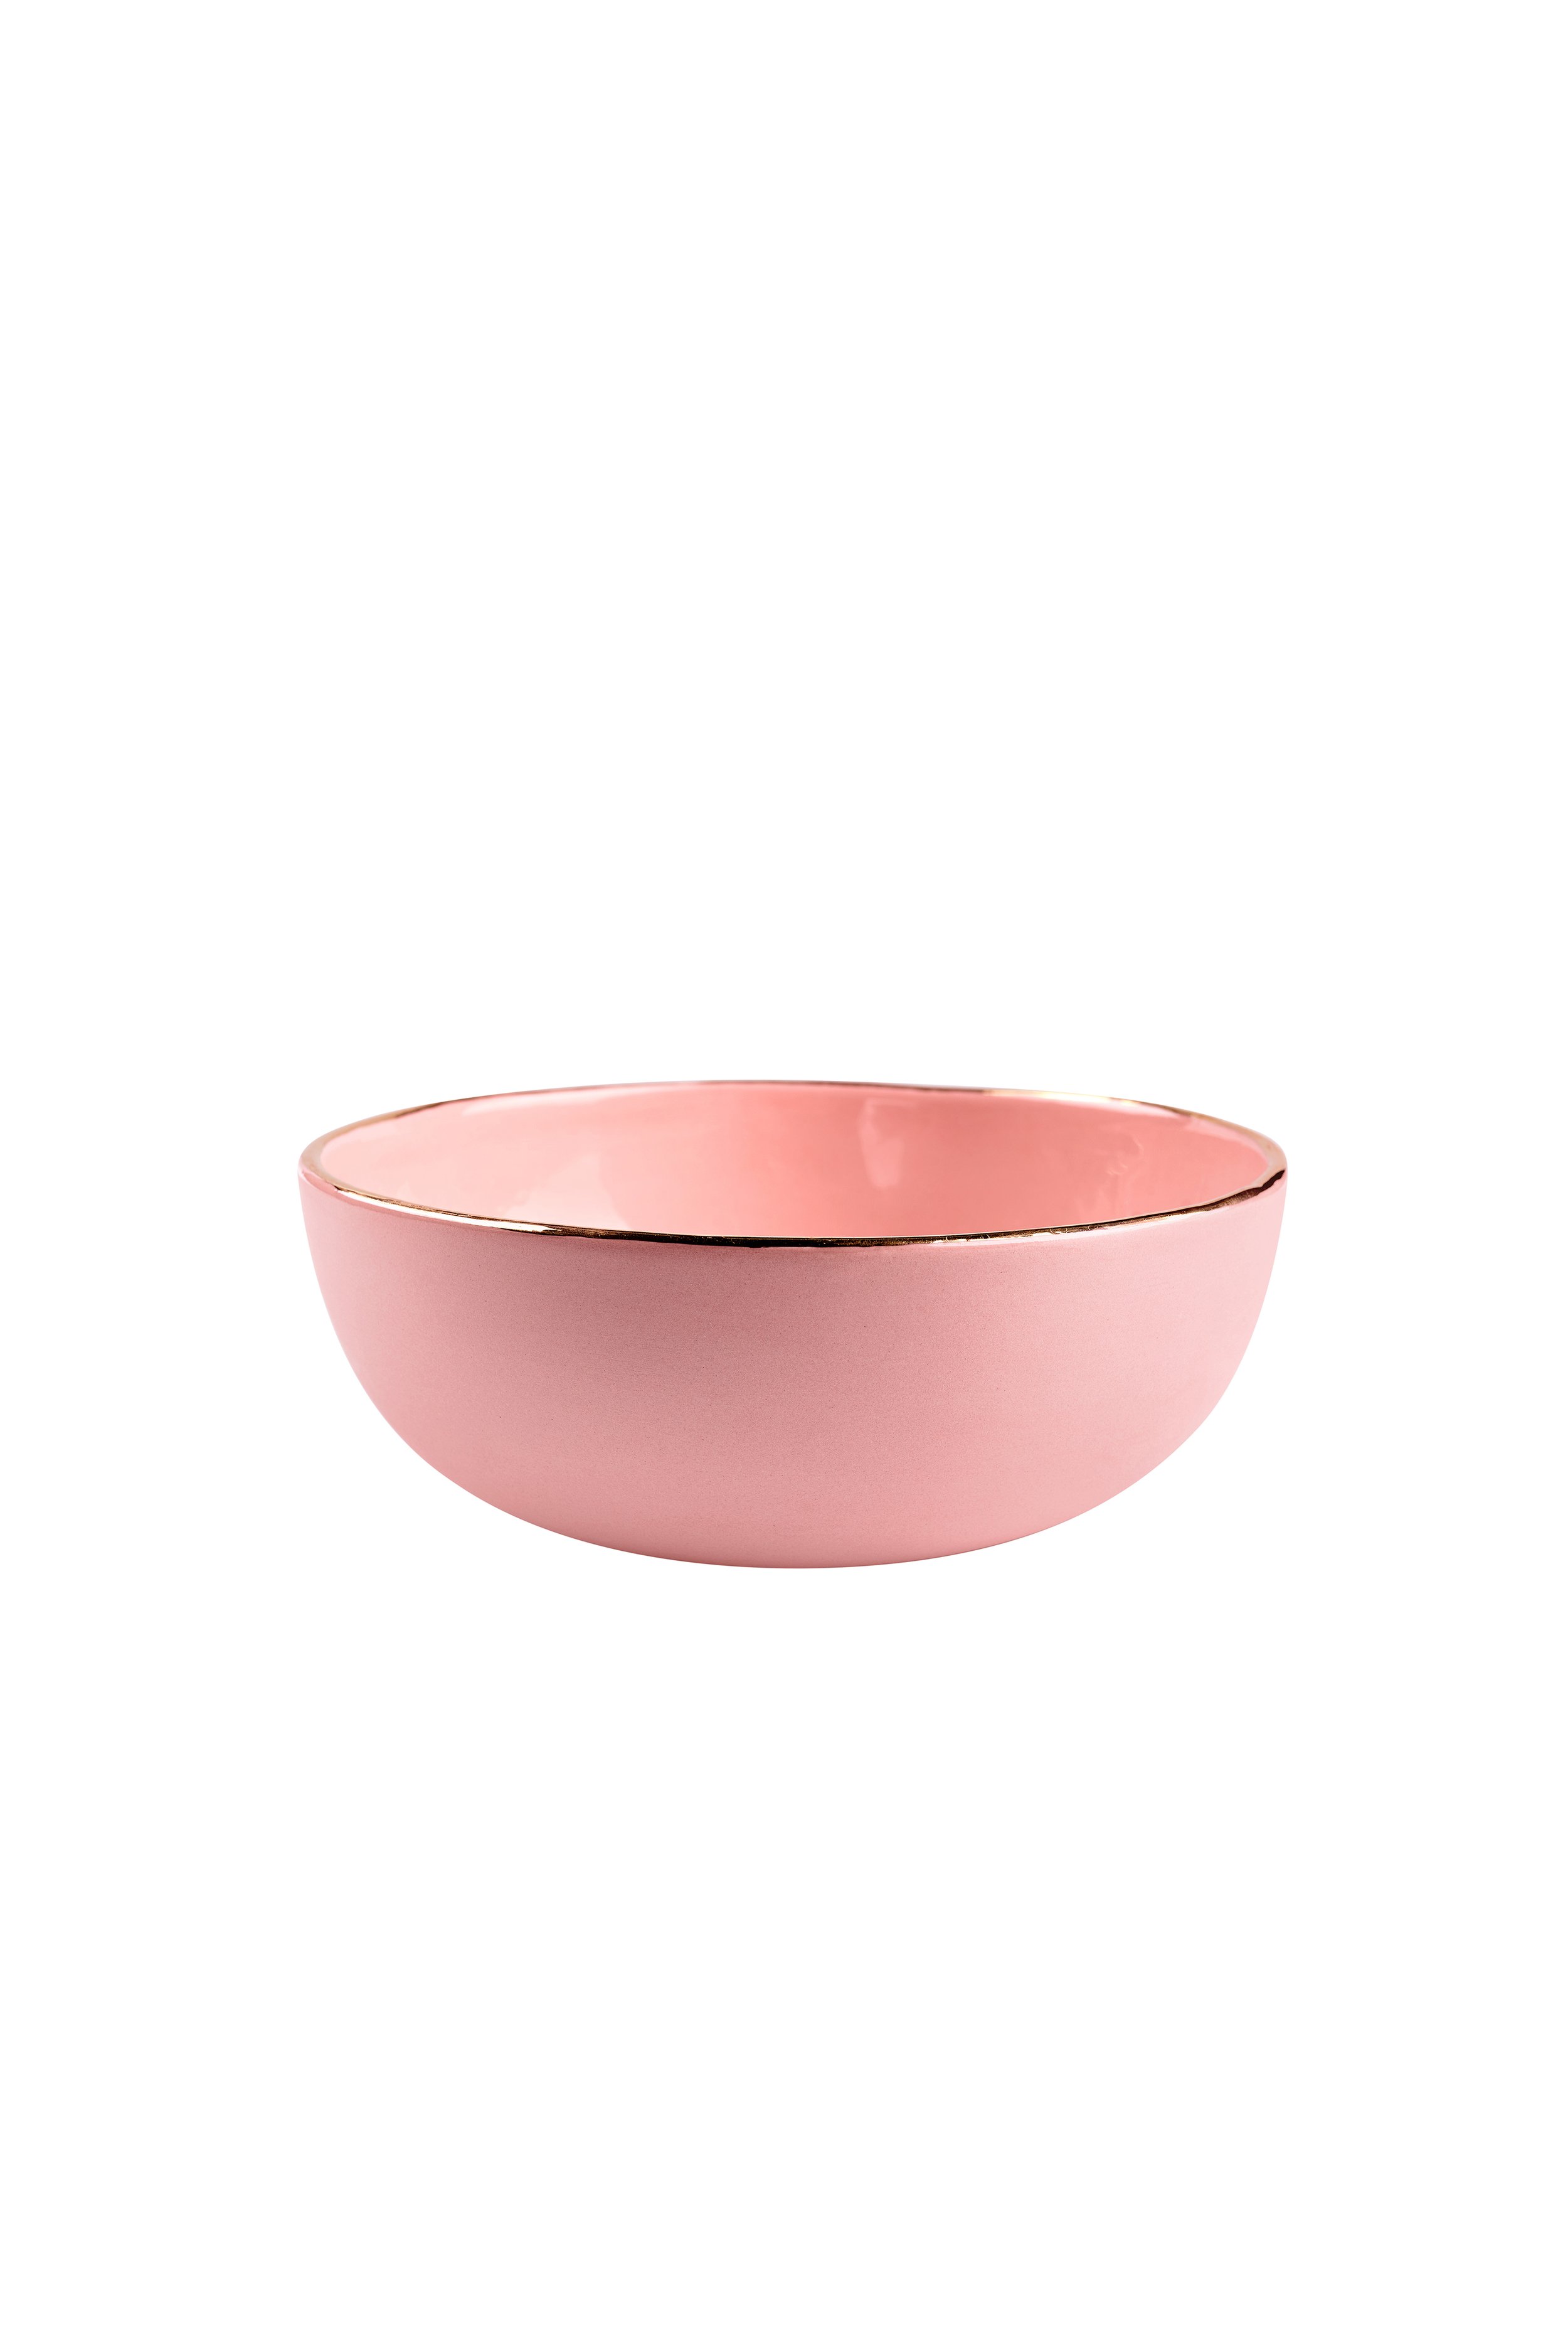 Ewixni Salad Cutter Bowl,Chopped Salad Bowl and Chopper Kit  for Personalized or Family Salad Portions(Pink) (Pink): Salad Bowls